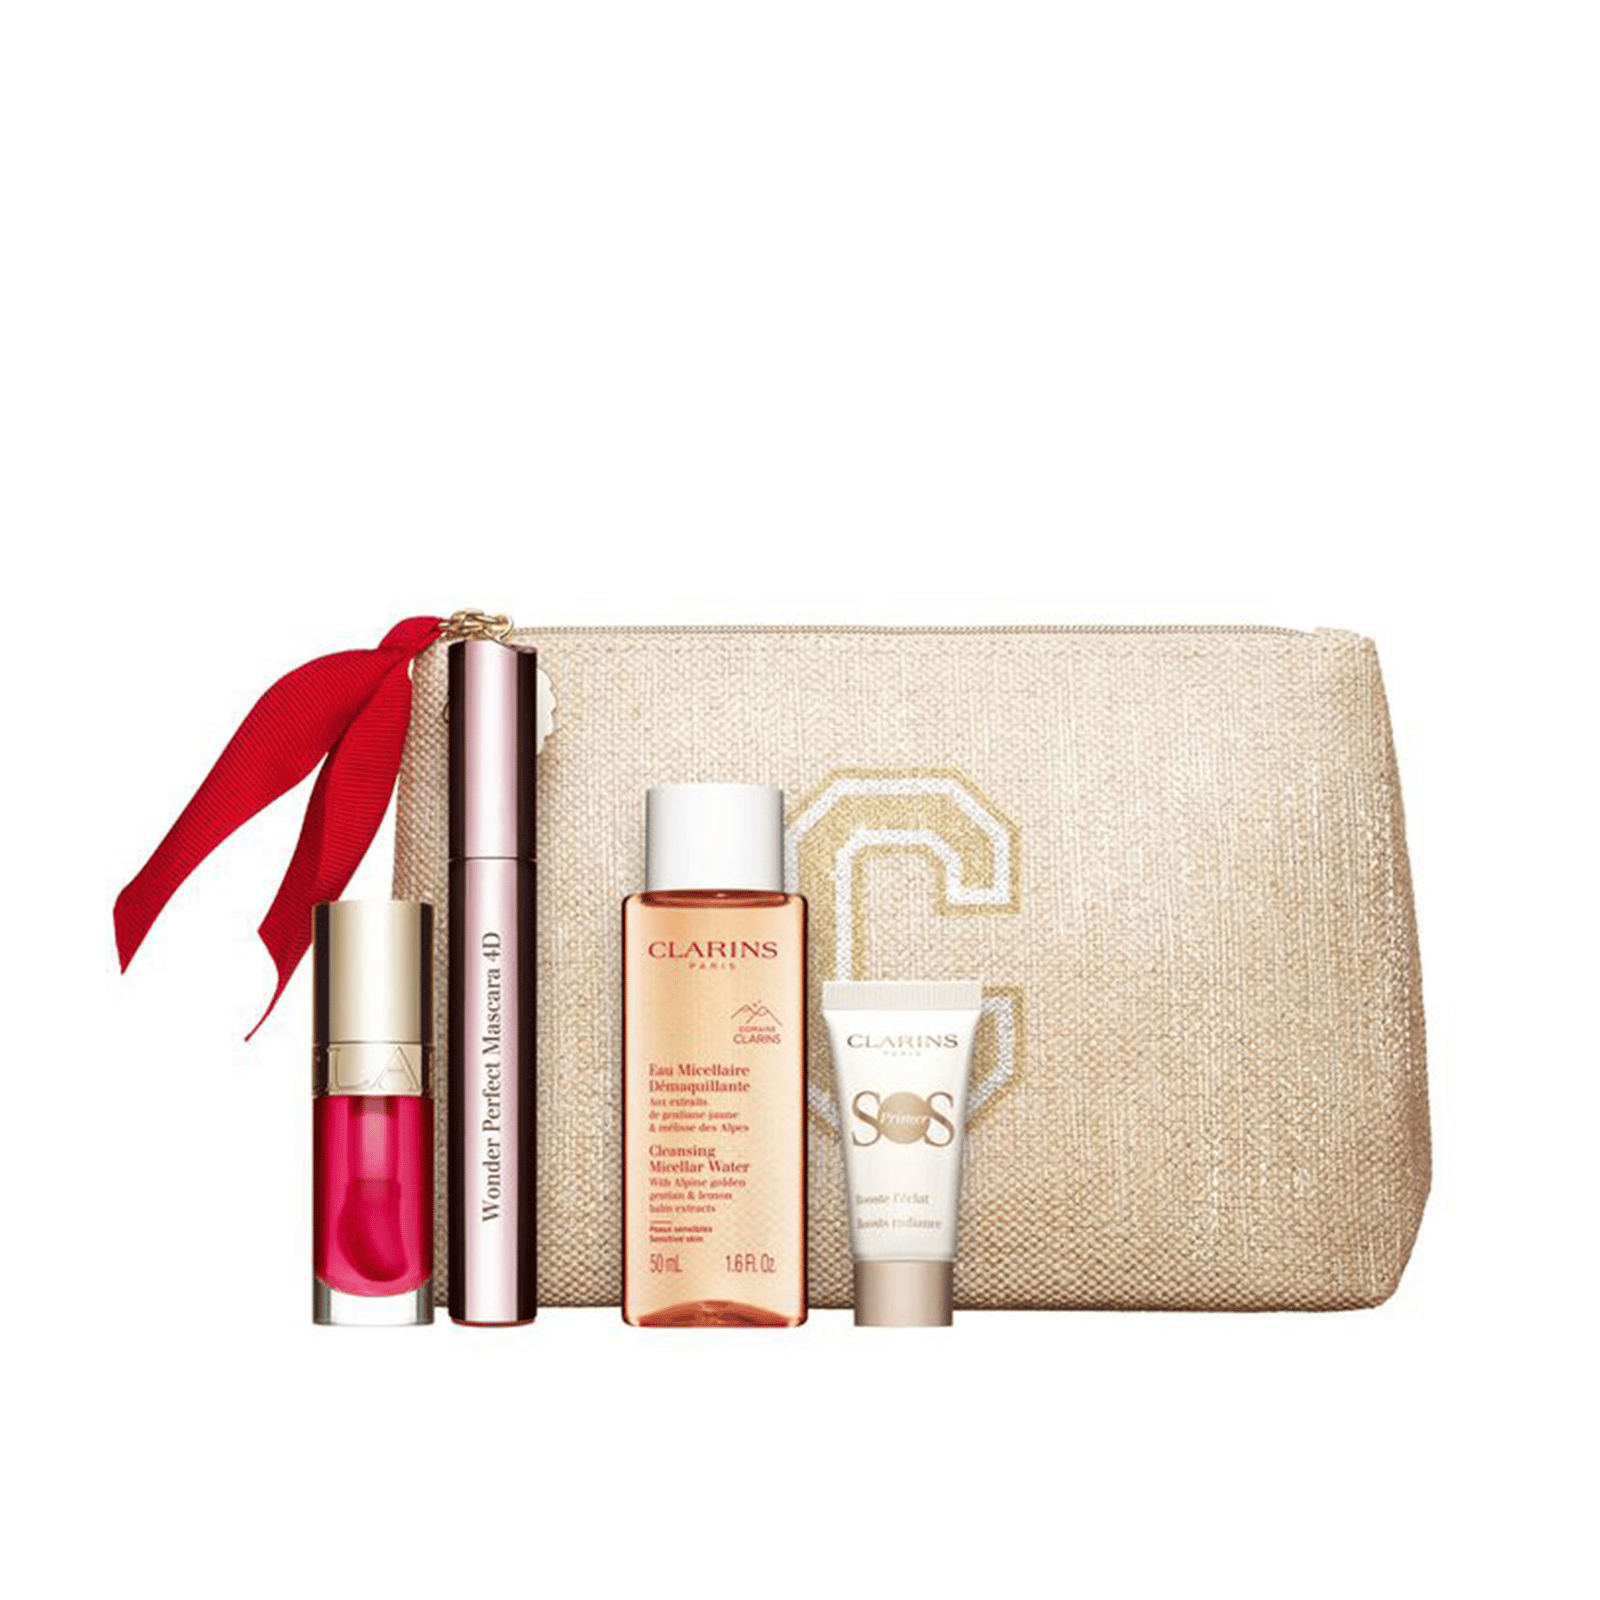 Clarins Make-Up Heroes Coffret